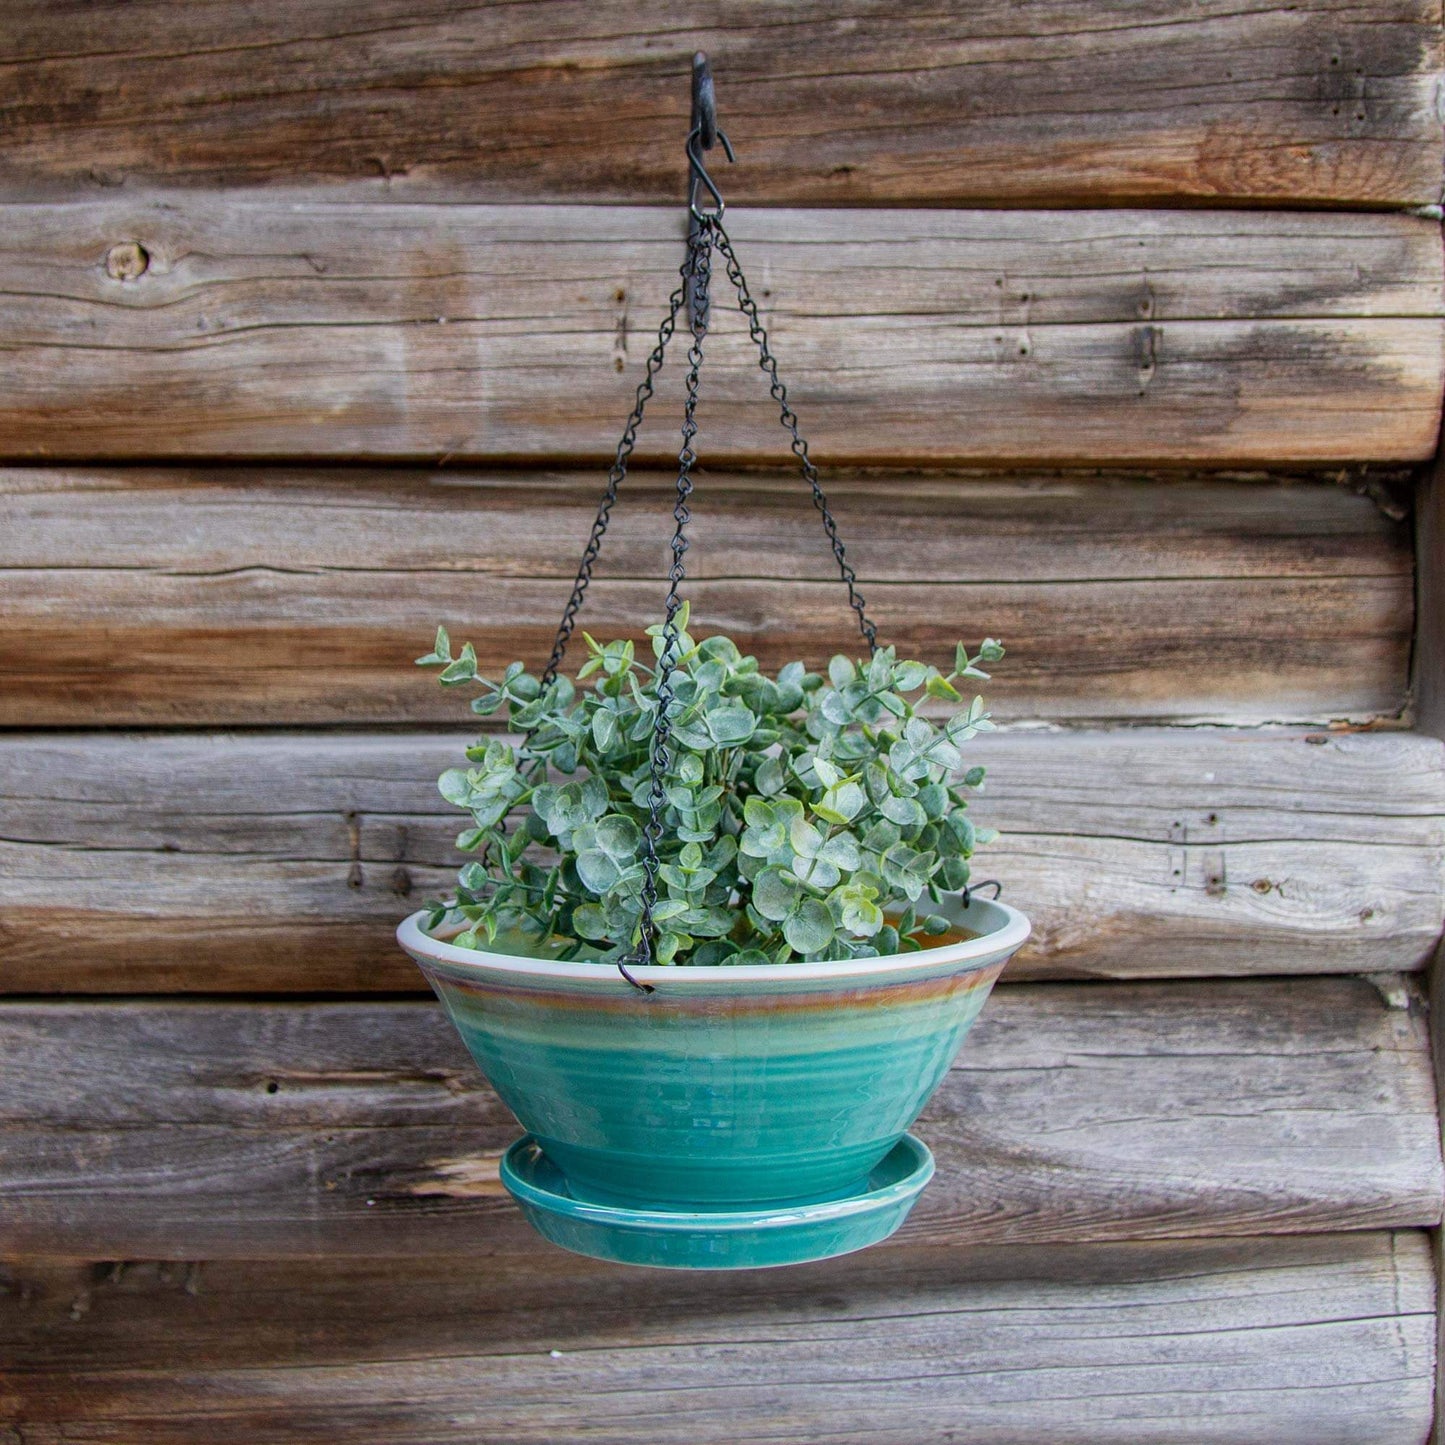 Handmade Pottery 9-1/2 Inch Hanging Planter in Green Oribe pattern made by Georgetown Pottery in Maine